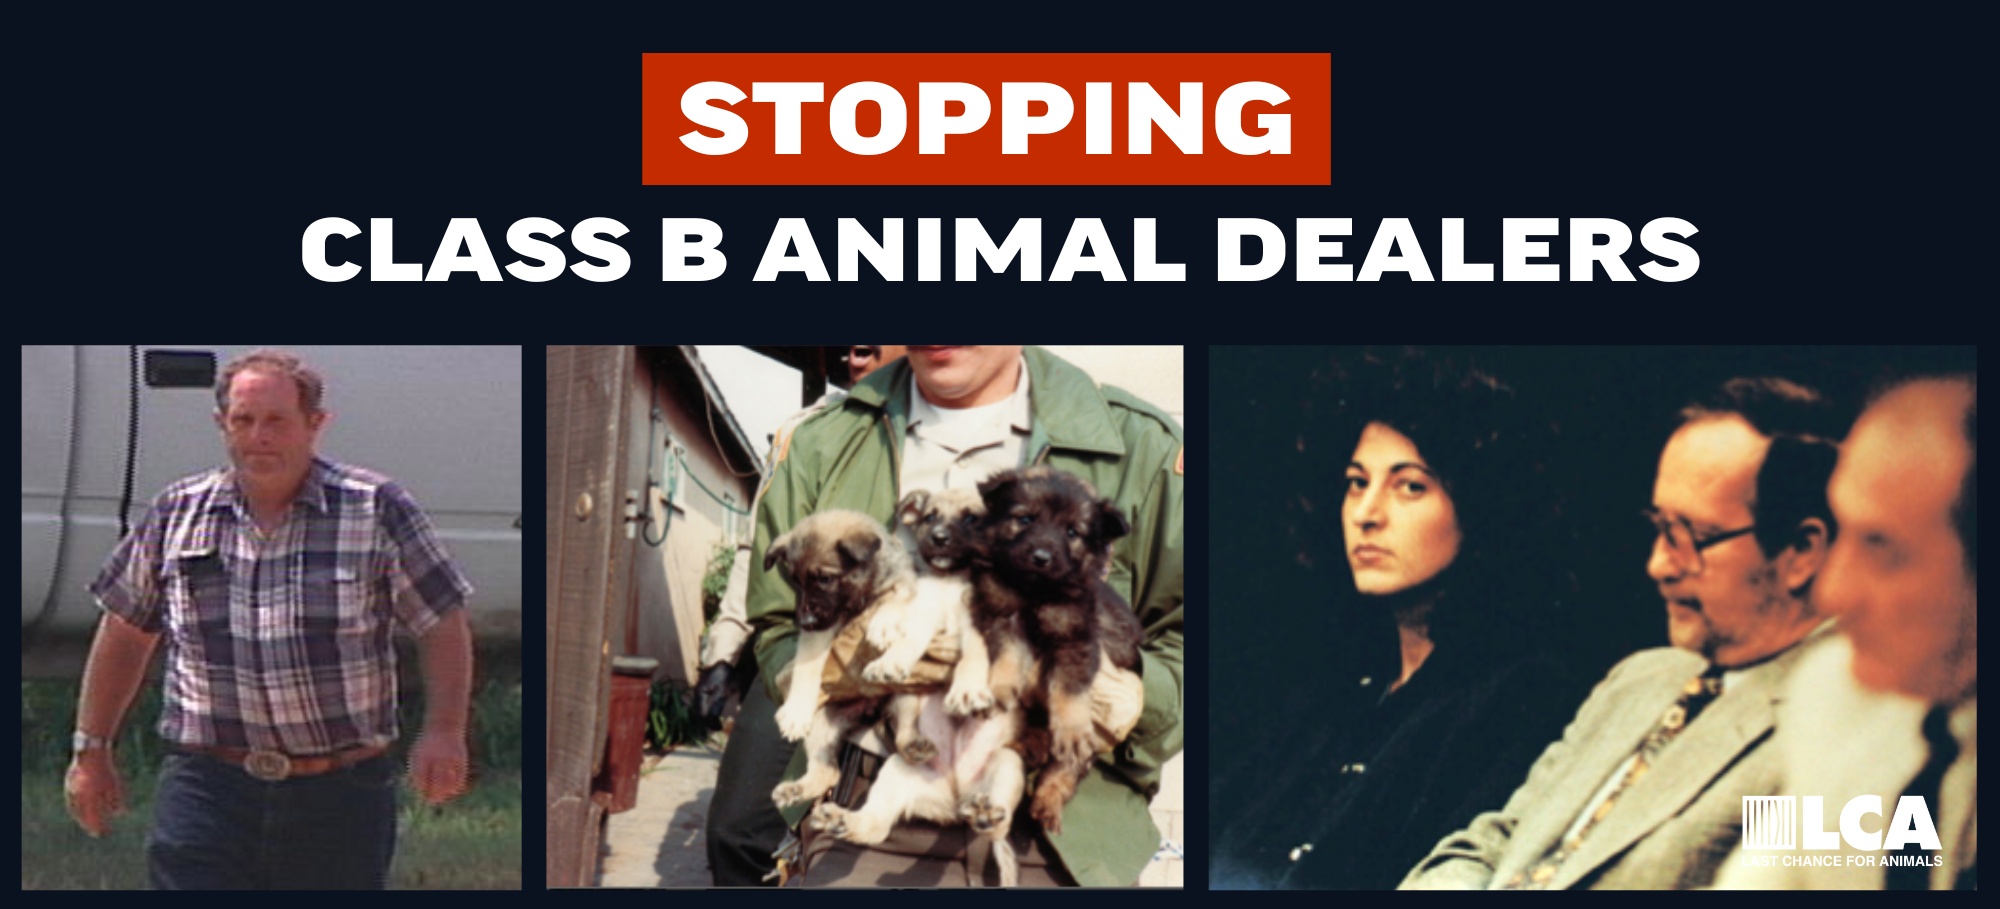 Stopping Class B Animal Dealers